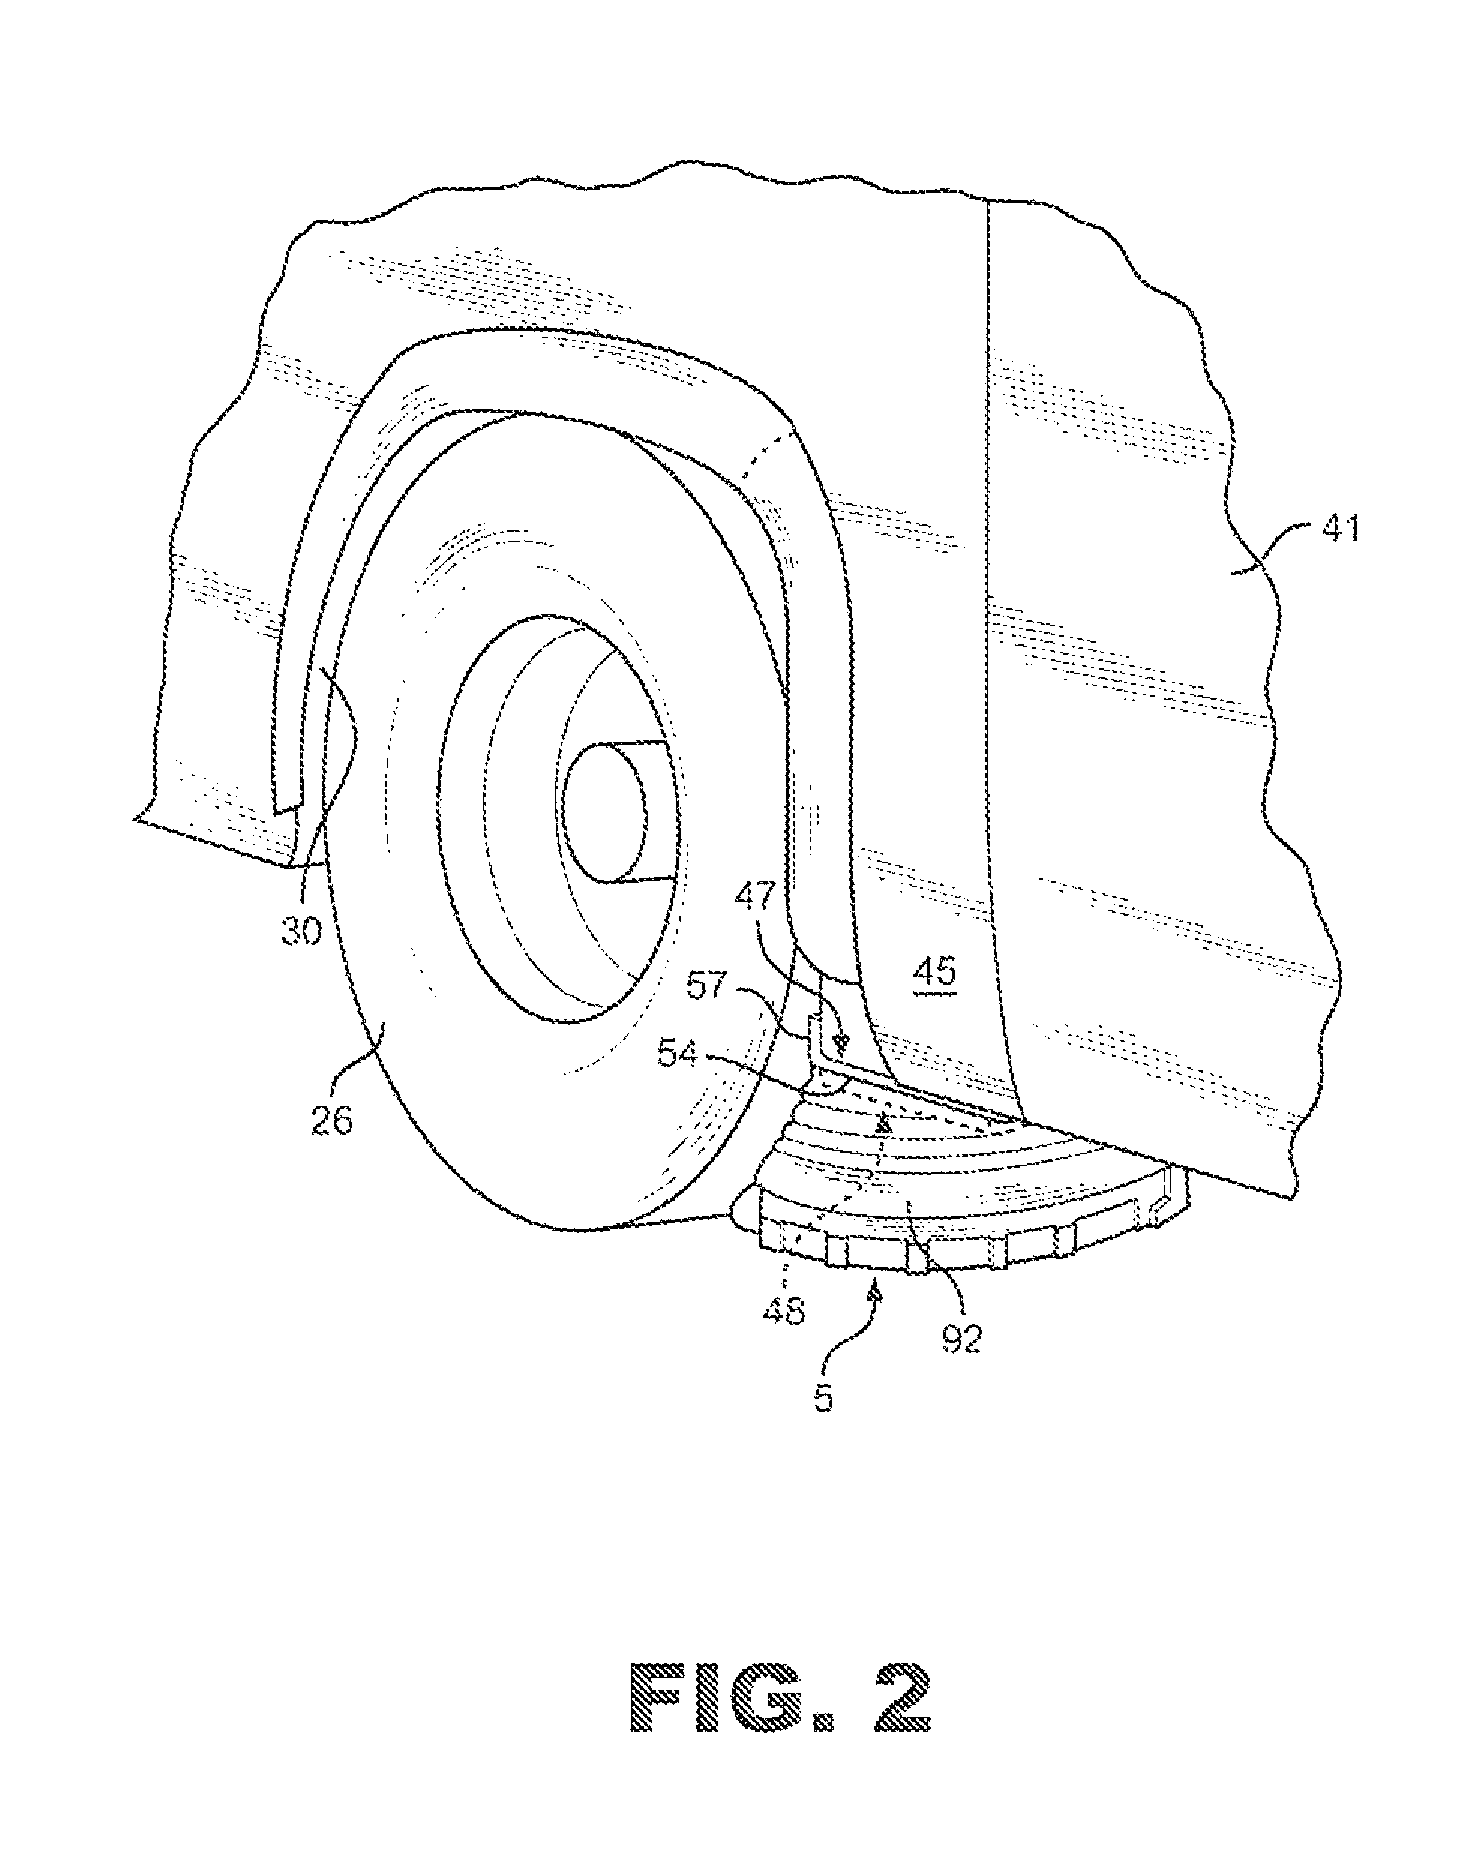 Telescoping vehicle safety guard